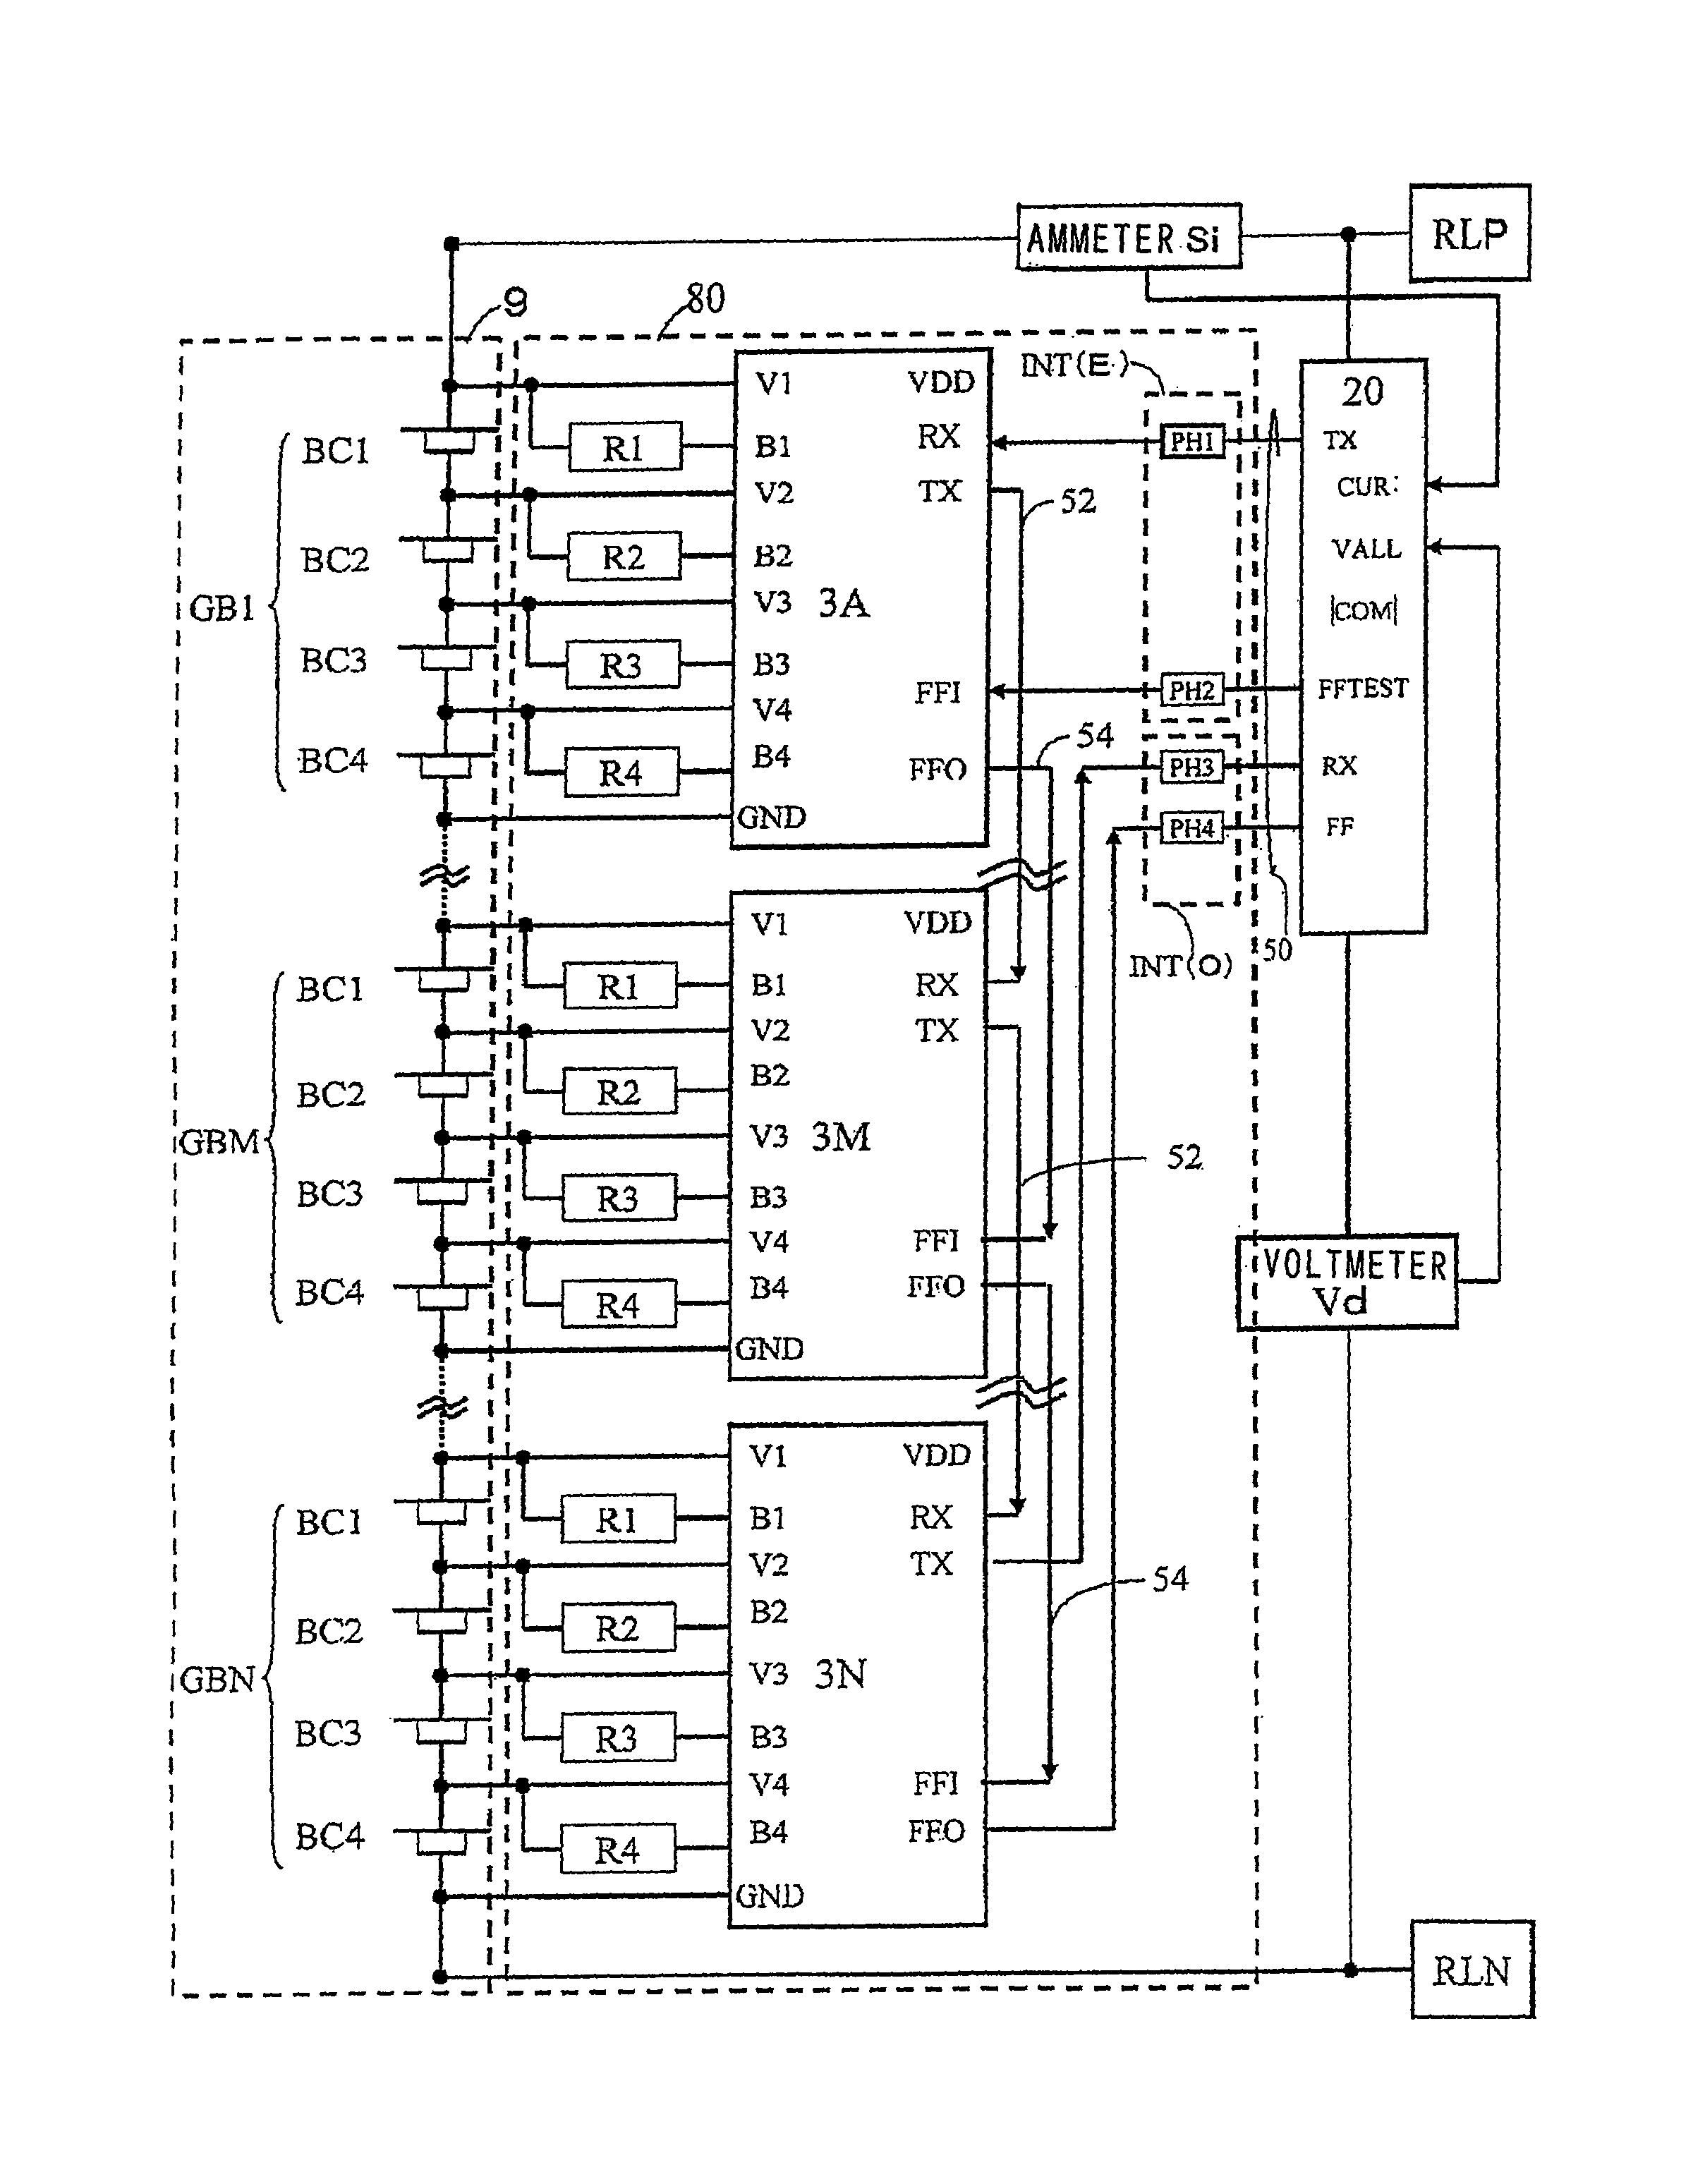 Vehicle power supply device